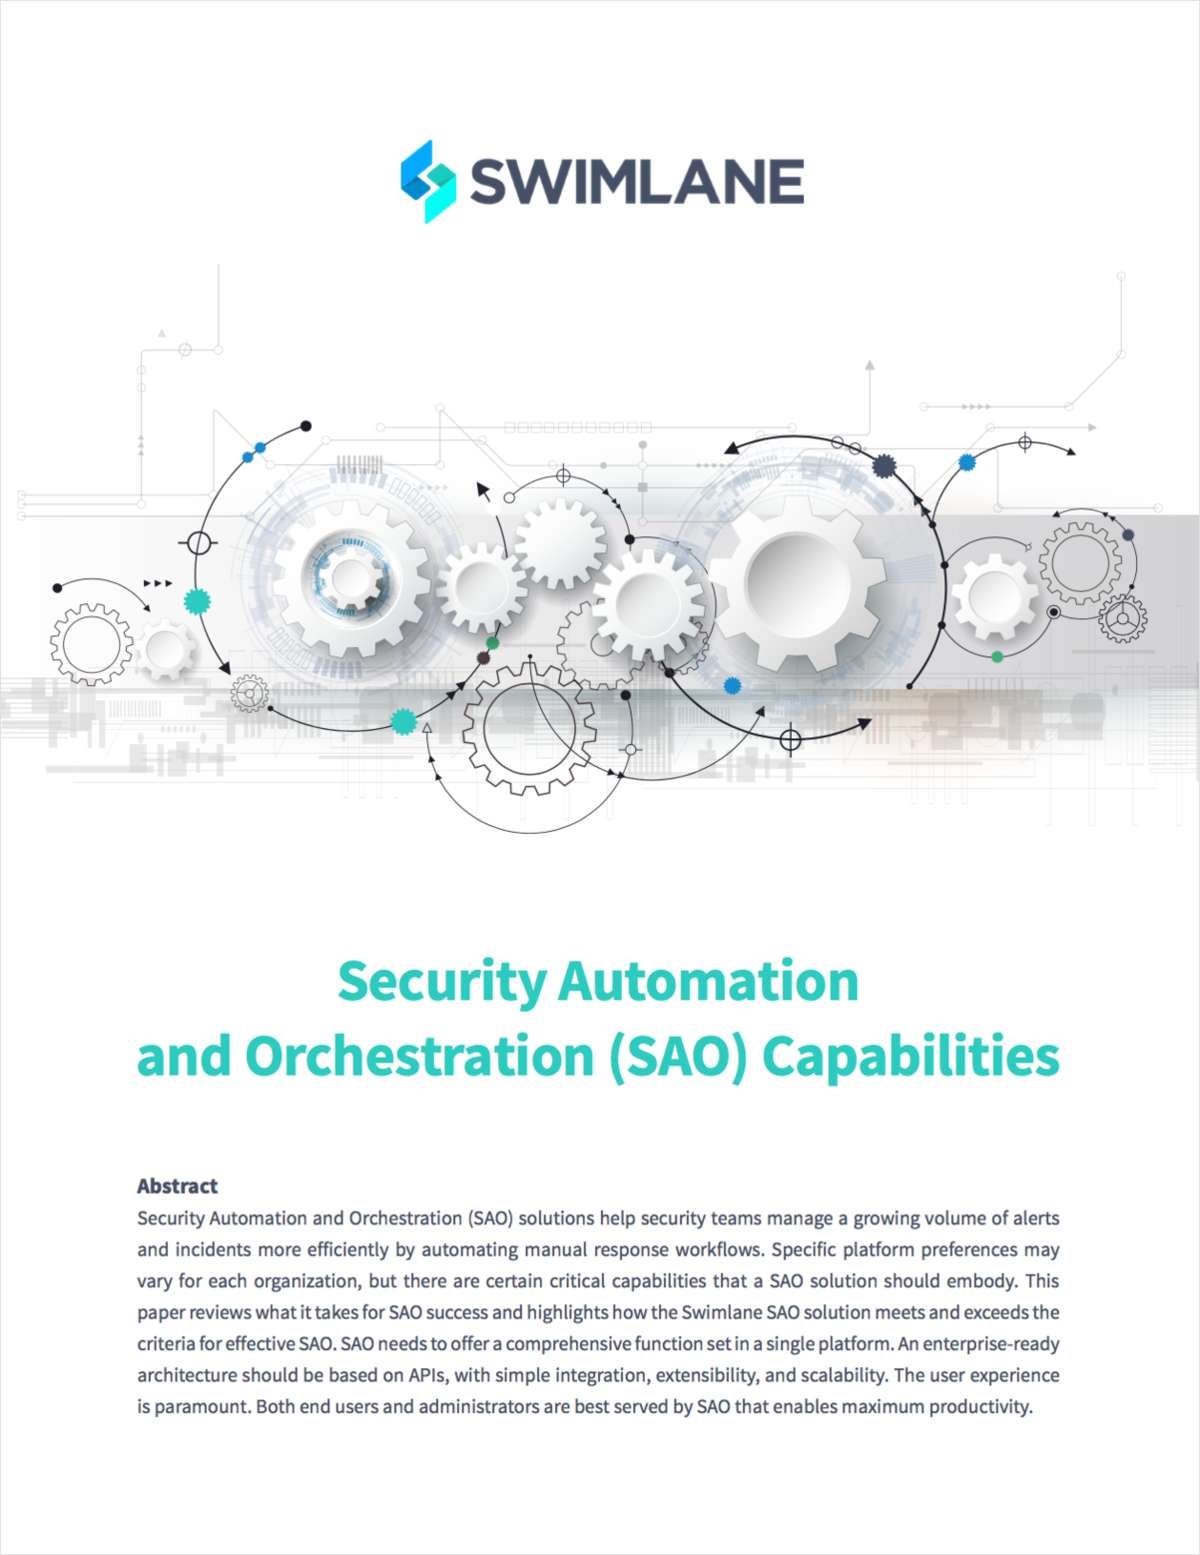 Security Automation and Orchestration (SAO) Capabilities